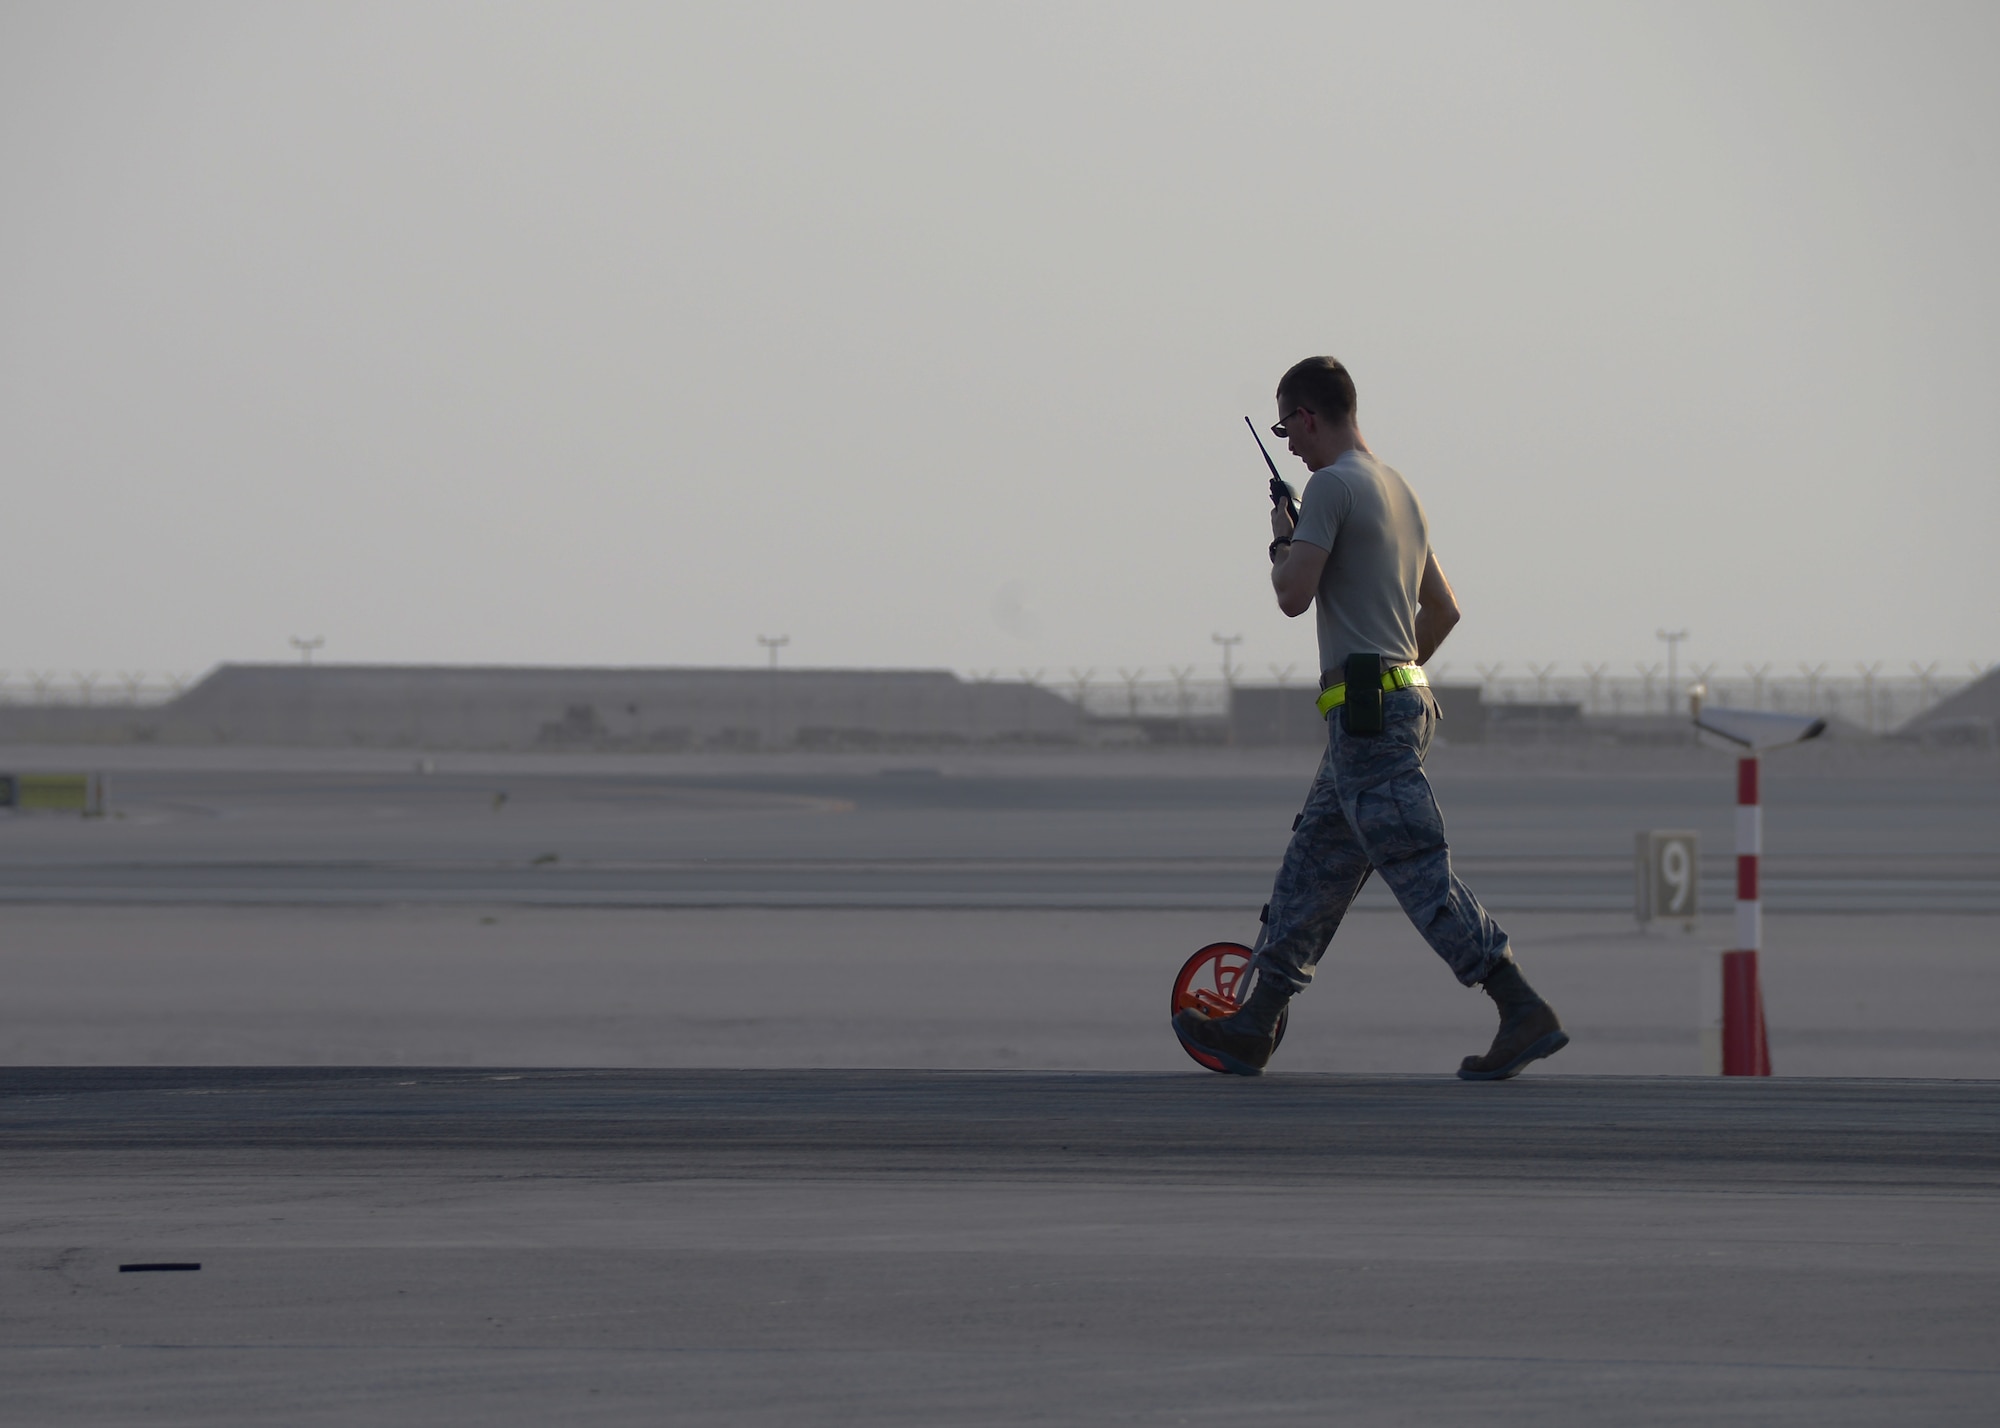 Tech. Sgt. Kenneth Mayfield, 379th Expeditionary Civil Engineer Squadron barrier maintenance NCO in-charge, measures how far the cable for the Aircraft Arresting System went out during a certification test Oct. 9, 2016, at Al Udeid Air Base, Qatar. The barrier maintenance section re-certifies the AAS annually to ensure it is operational and ready to use at a moment’s notice. (U.S. Air Force photo/Senior Airman Miles Wilson/Released)